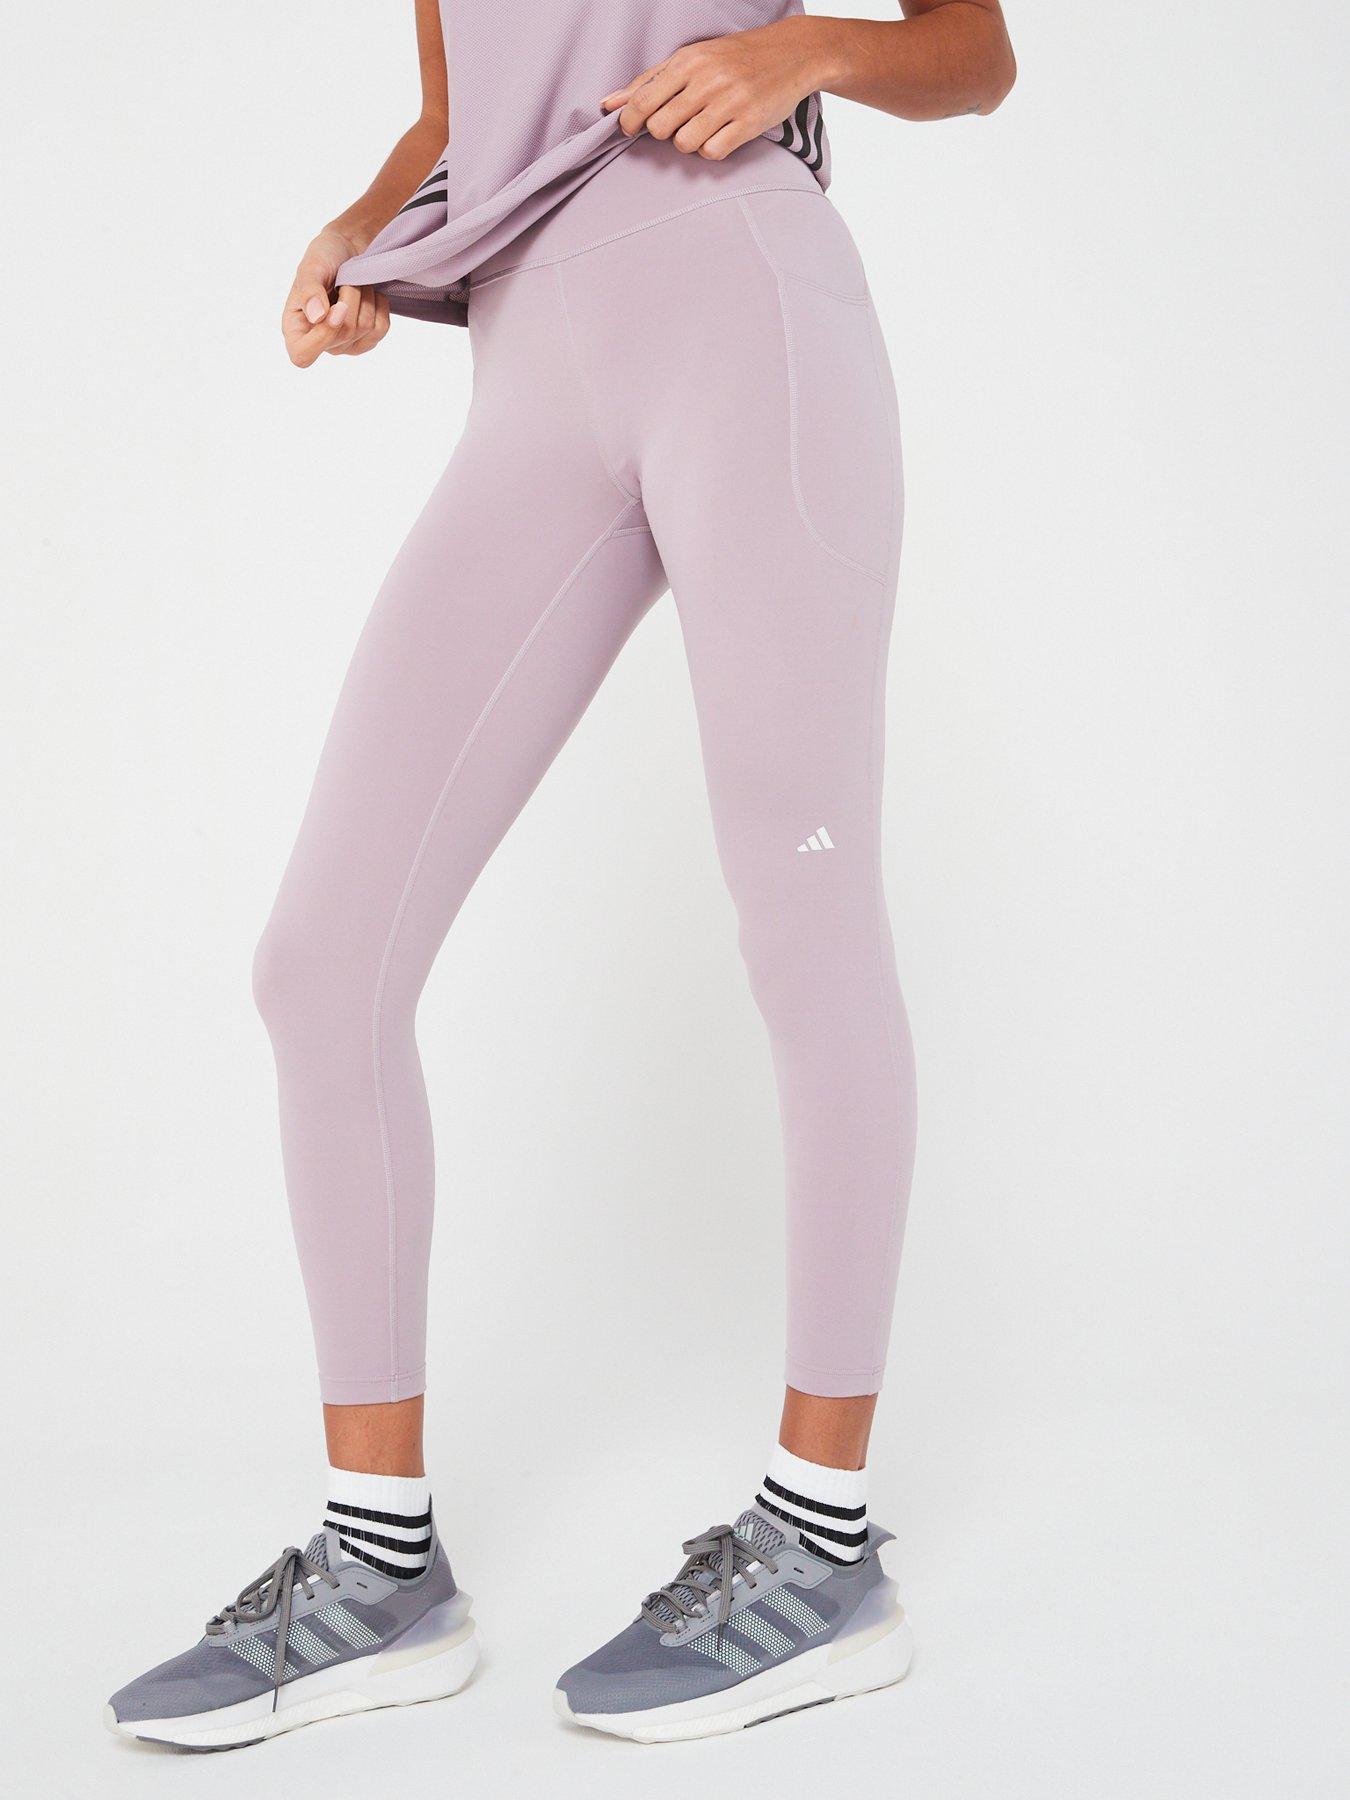 Under Armour Speed Stride Womens Capri Pink - S - Size Small